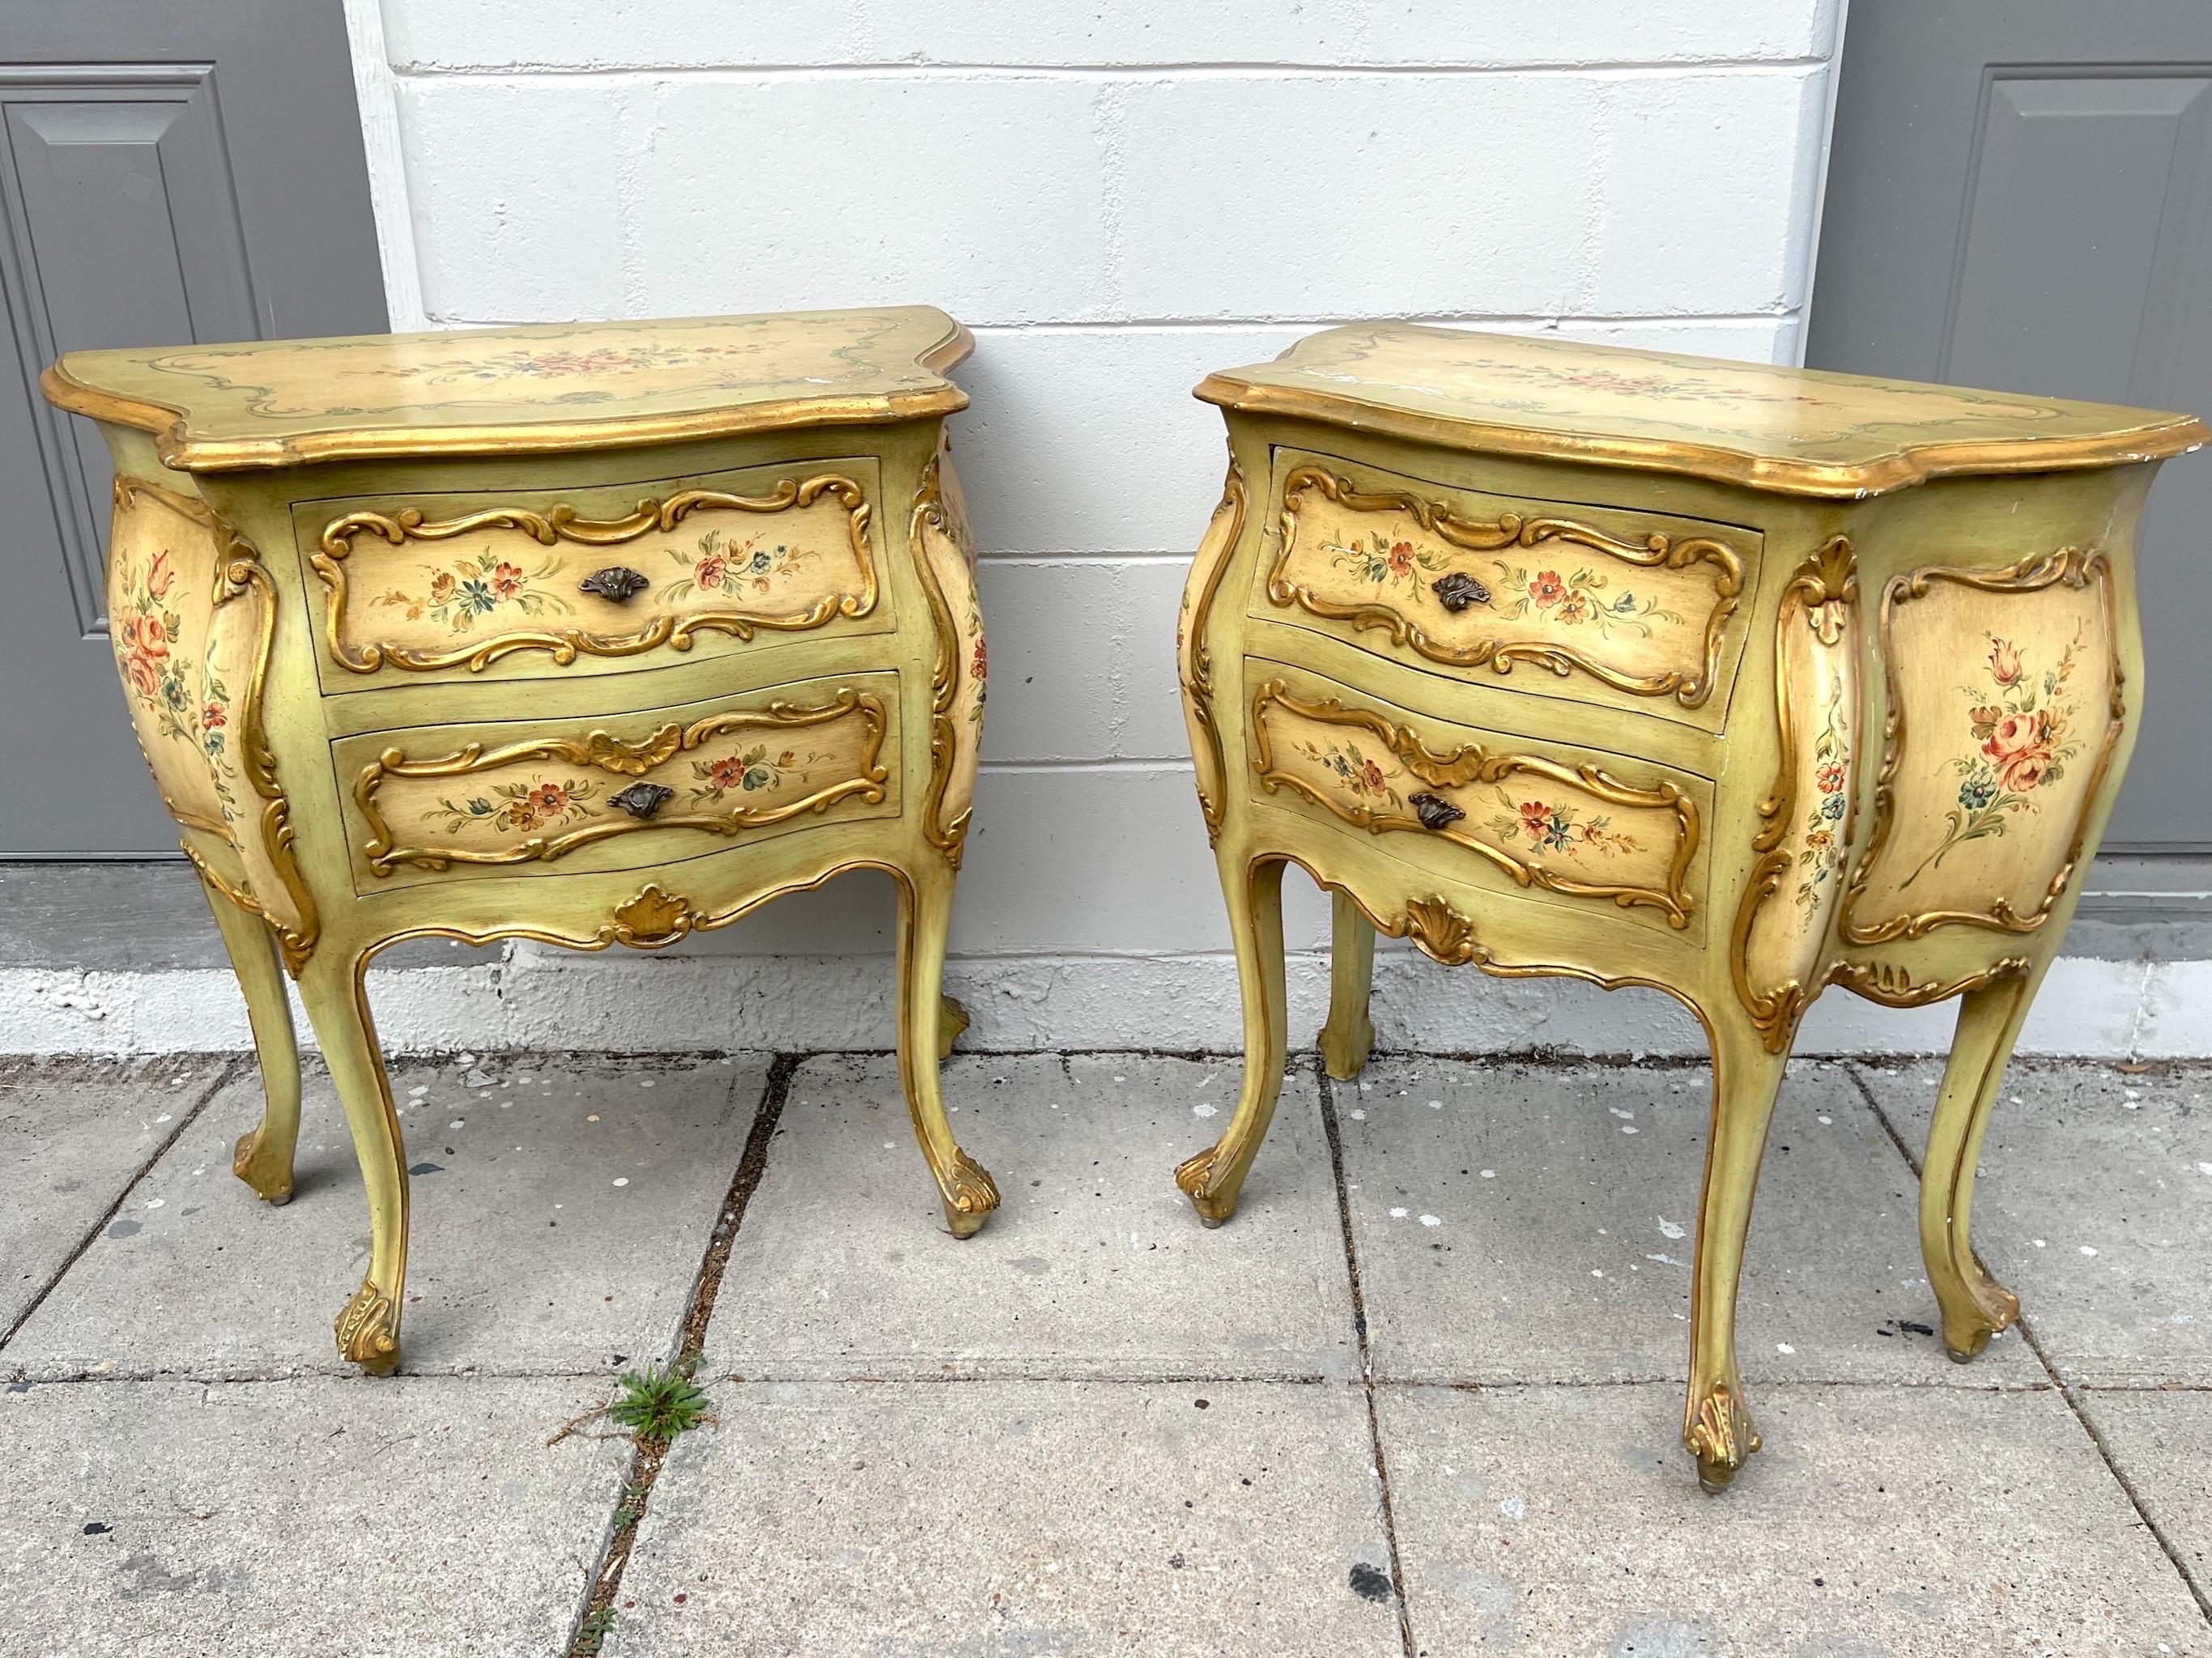 Vintage Florentine nightstand pair. Made in Italy.
Paint decorated floral design with gold gilded trim on serpentine style front. 
Cabriole legs with hand carved accents. 